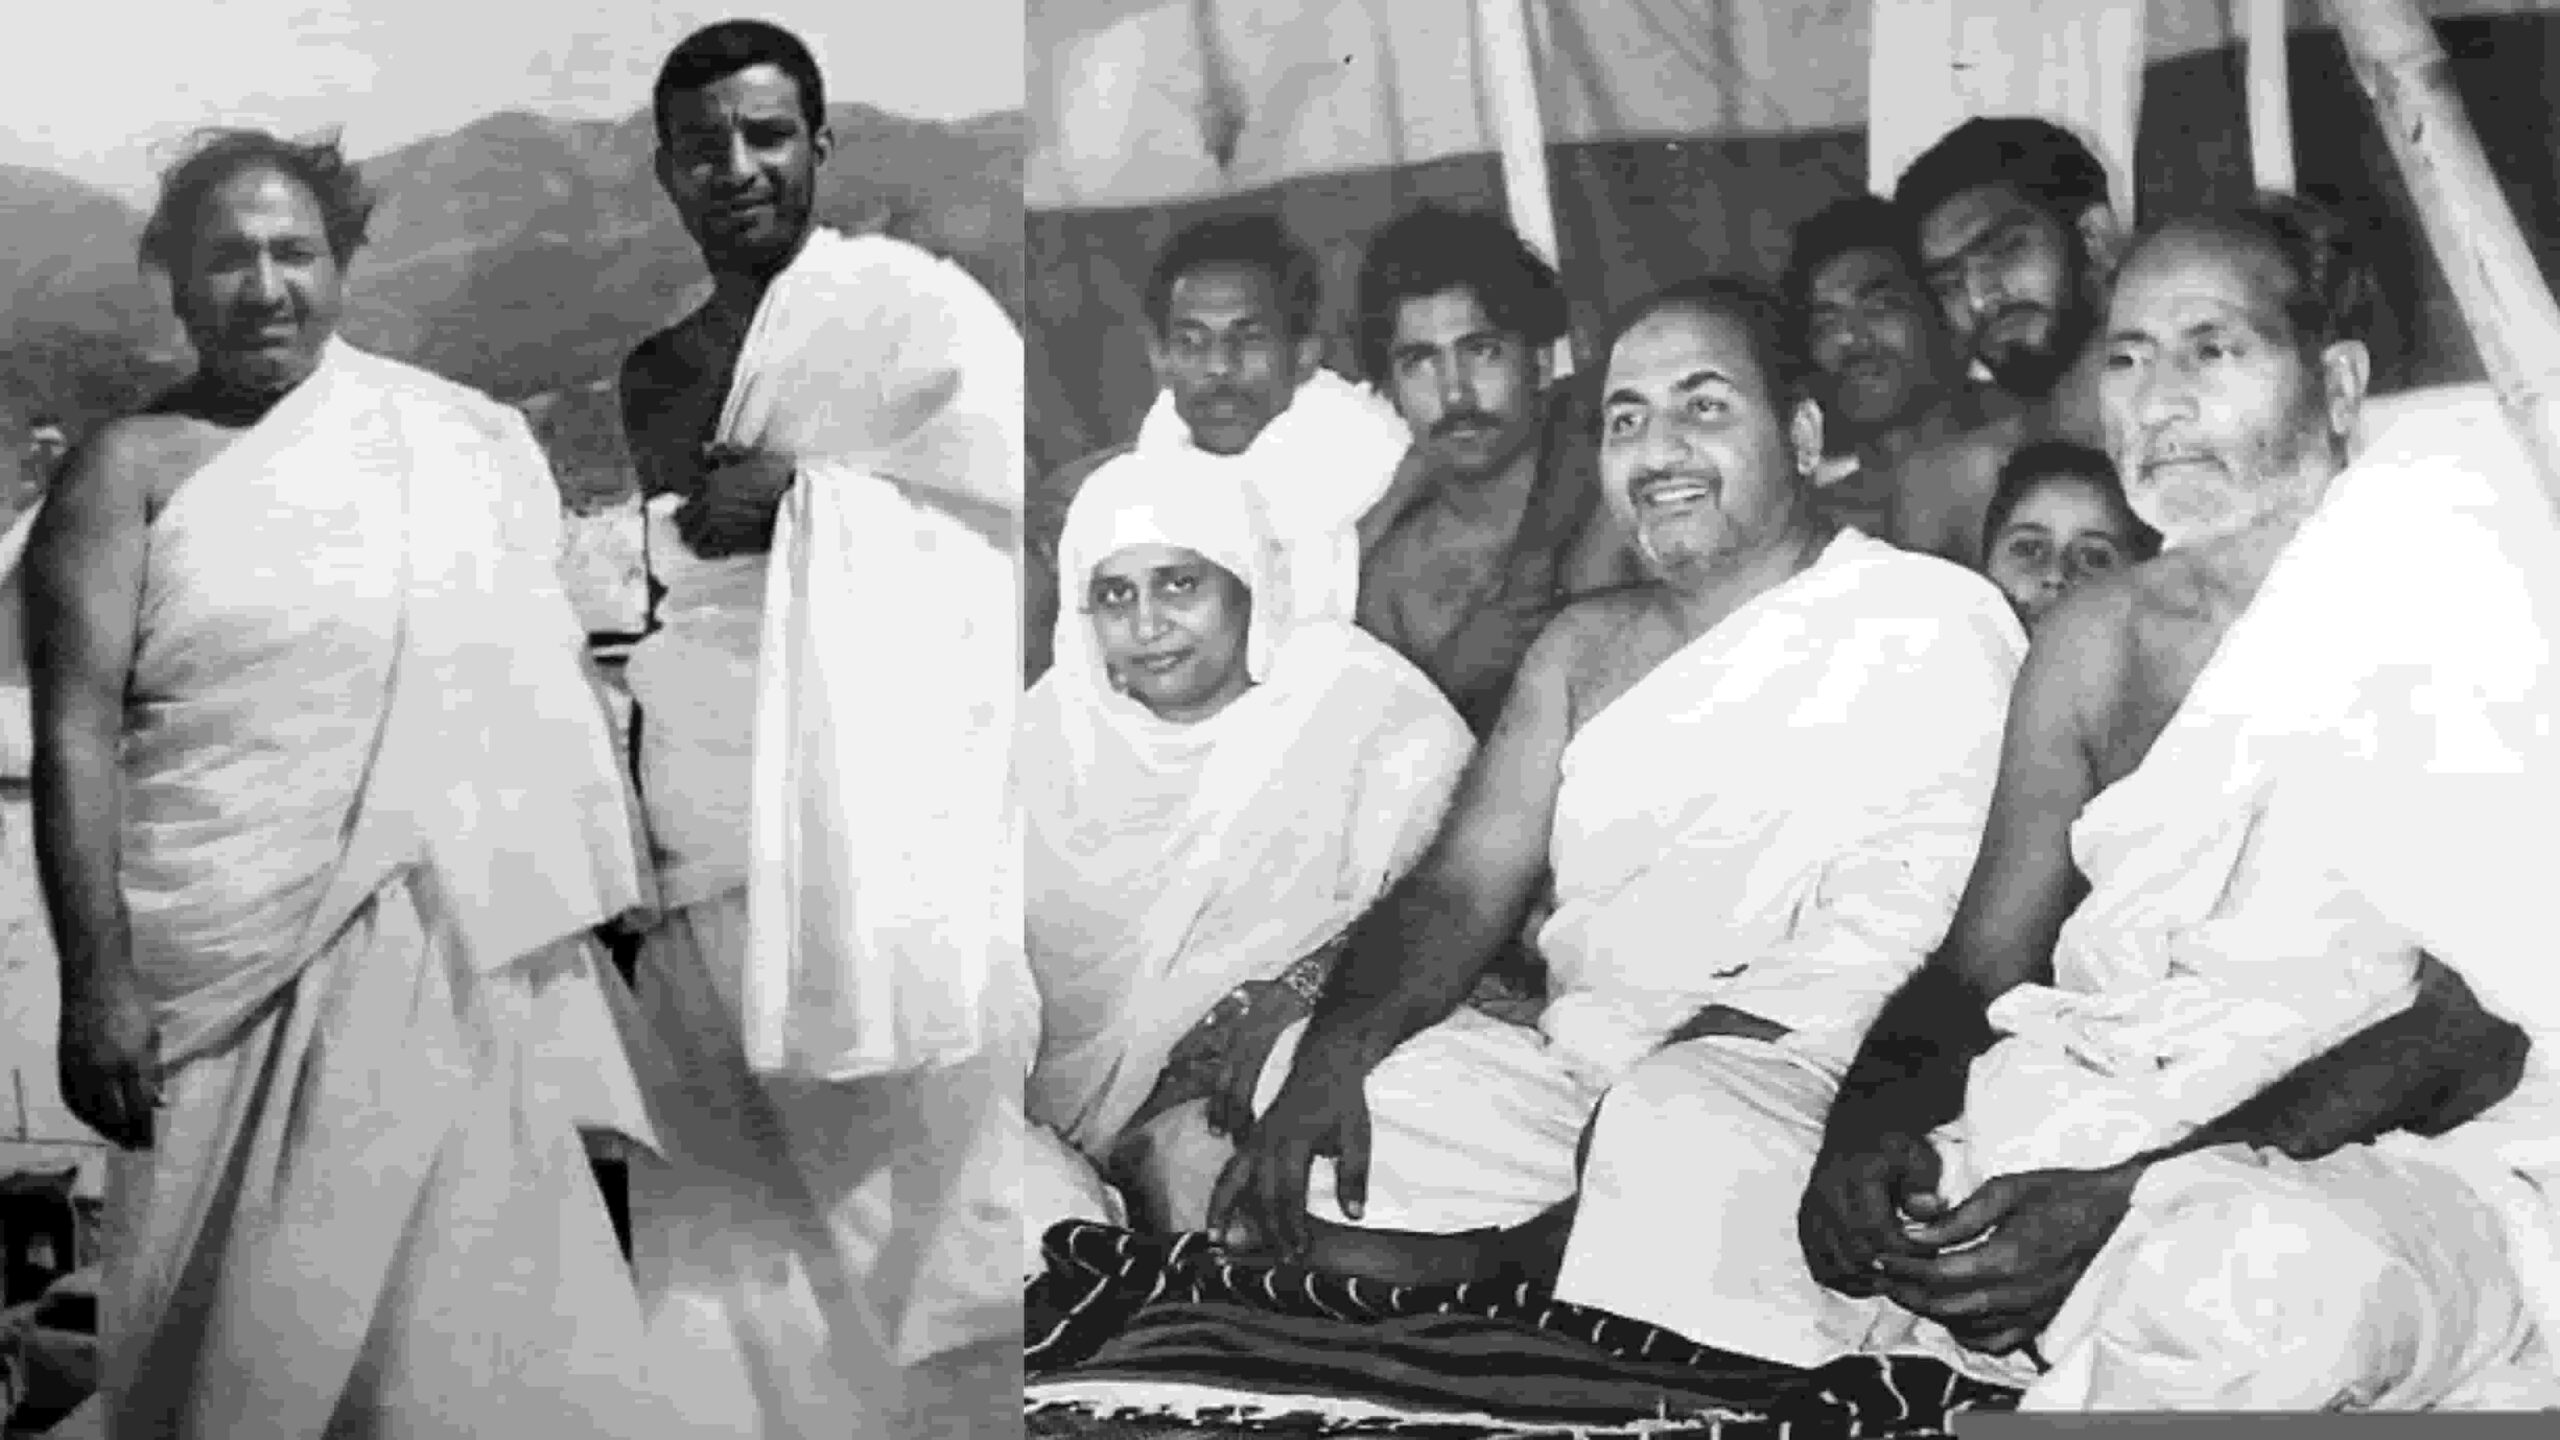 Why did Mohammed Rafi go to Haj? The real reason